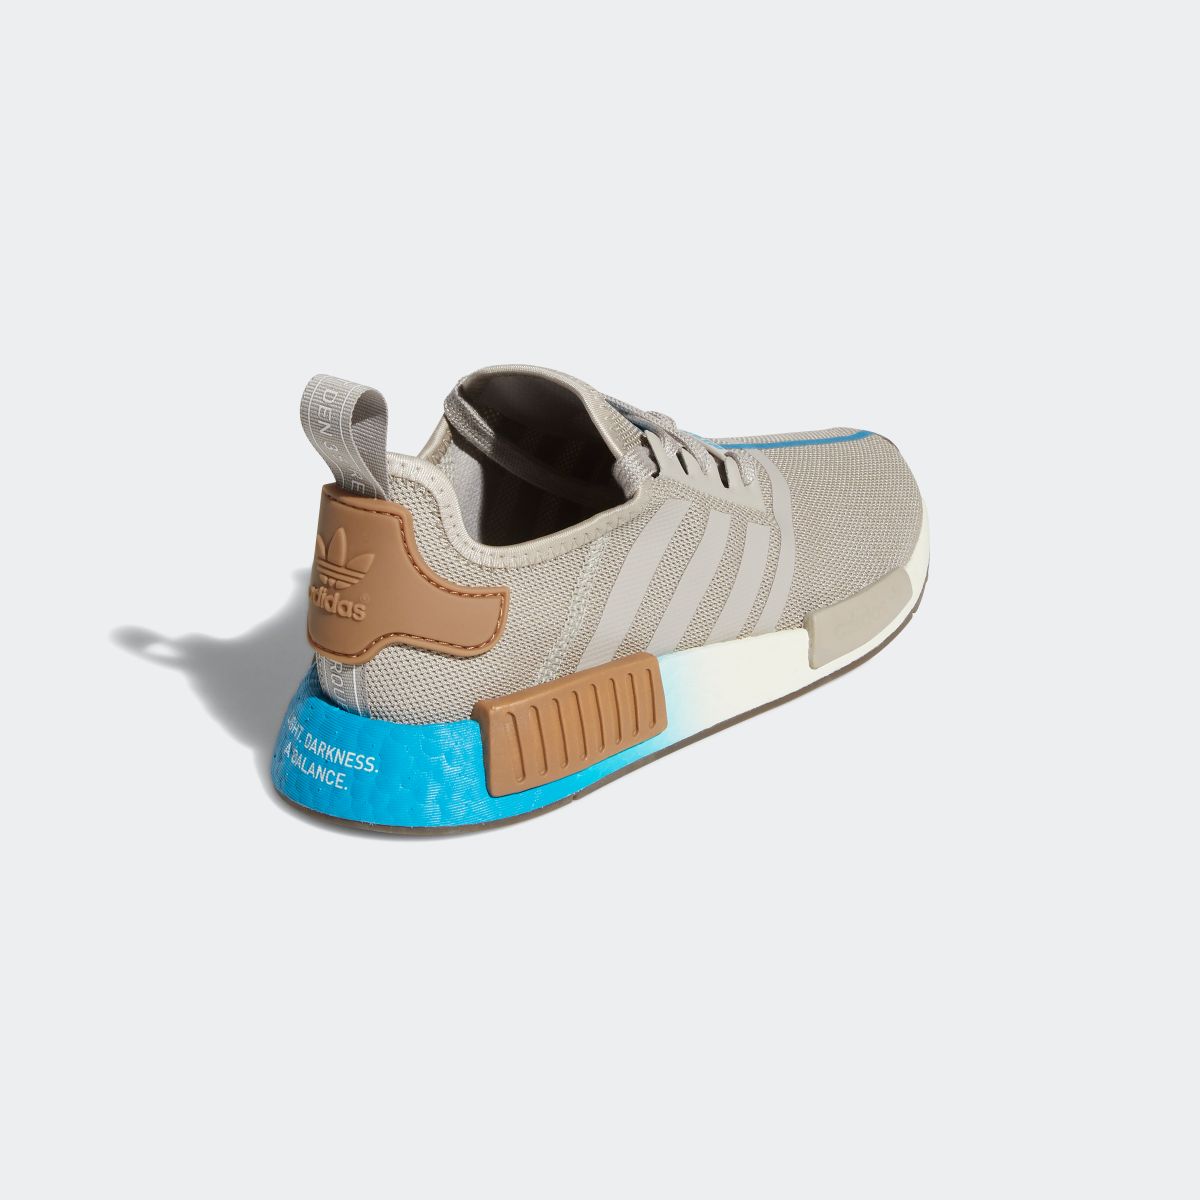 adidas NMD R1 gray white 36 from 6900 in price comparison